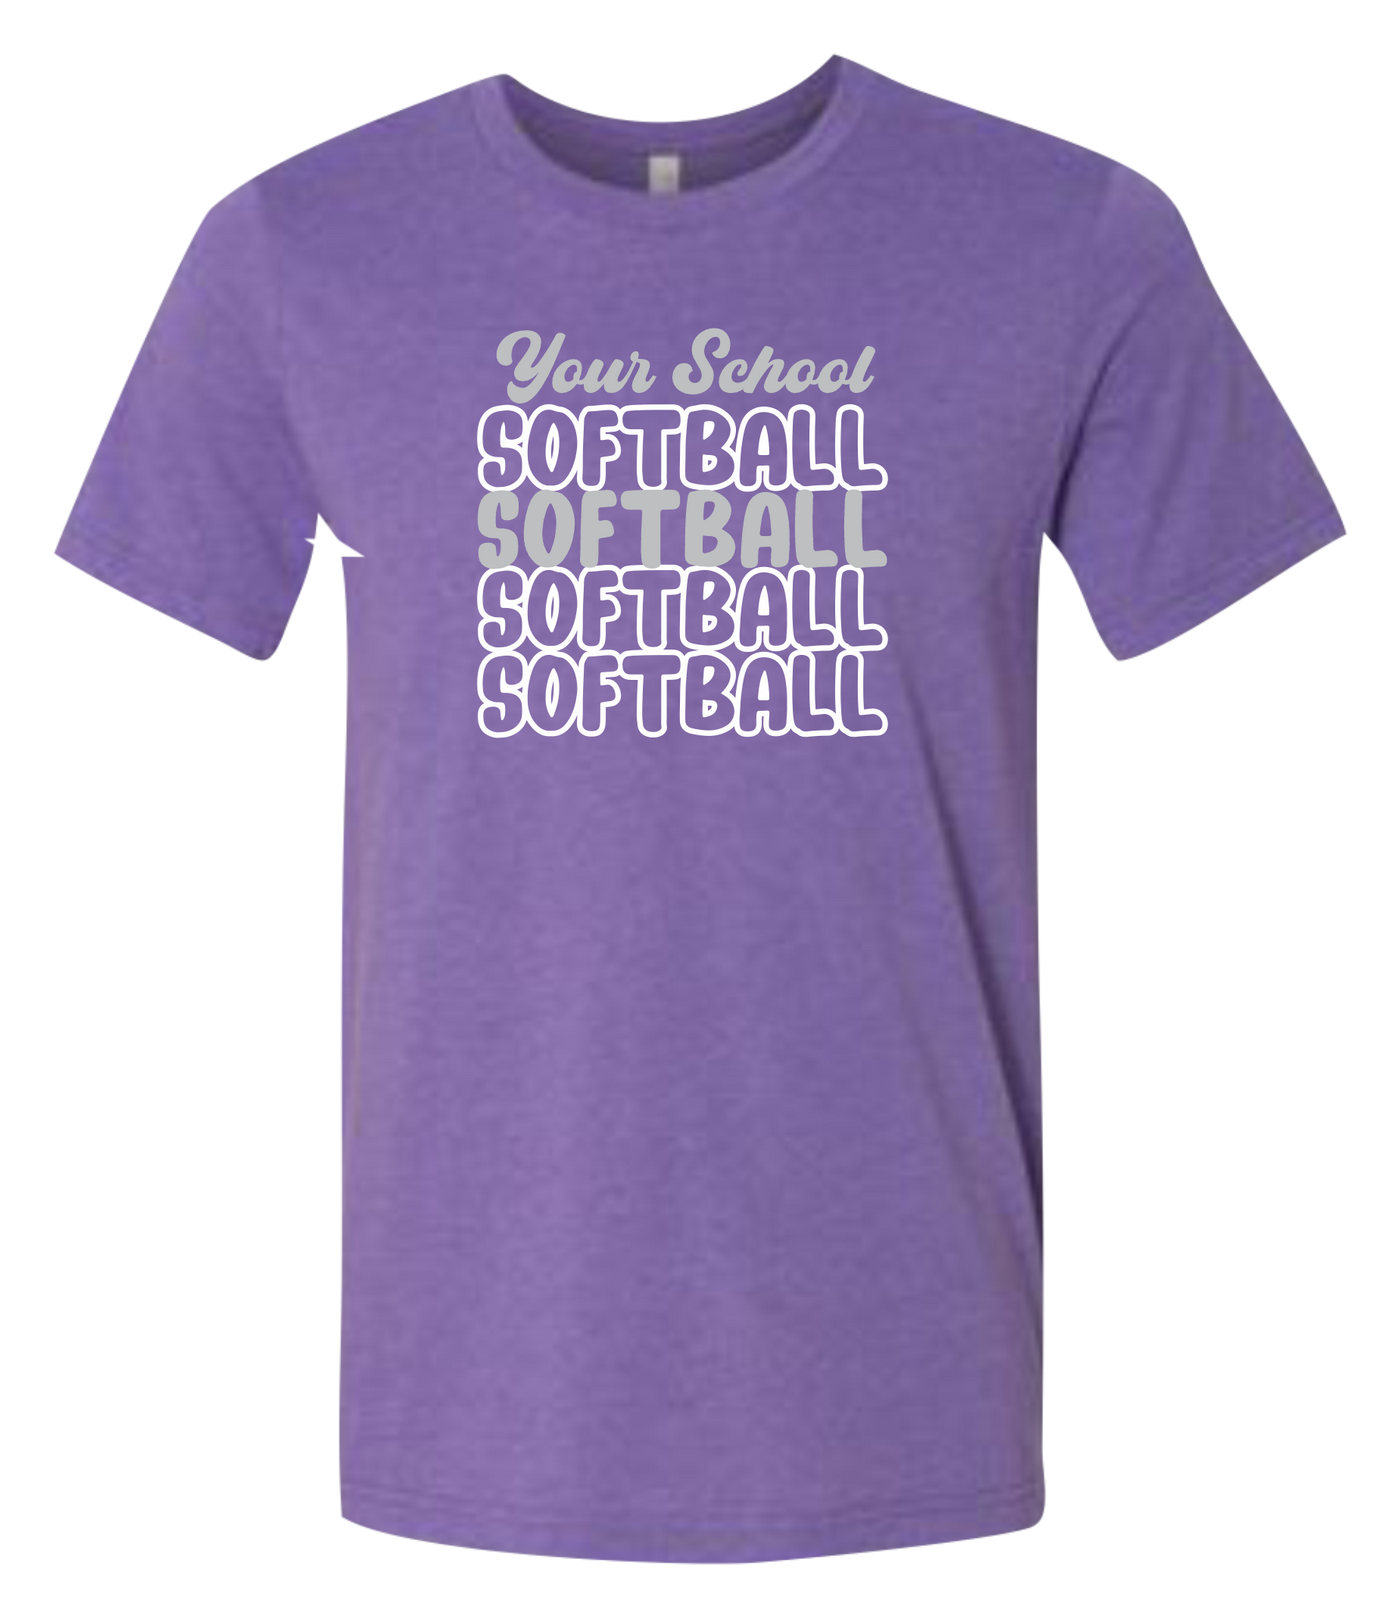 Bubble Letters Softball Short Sleeve Graphic T-shirt